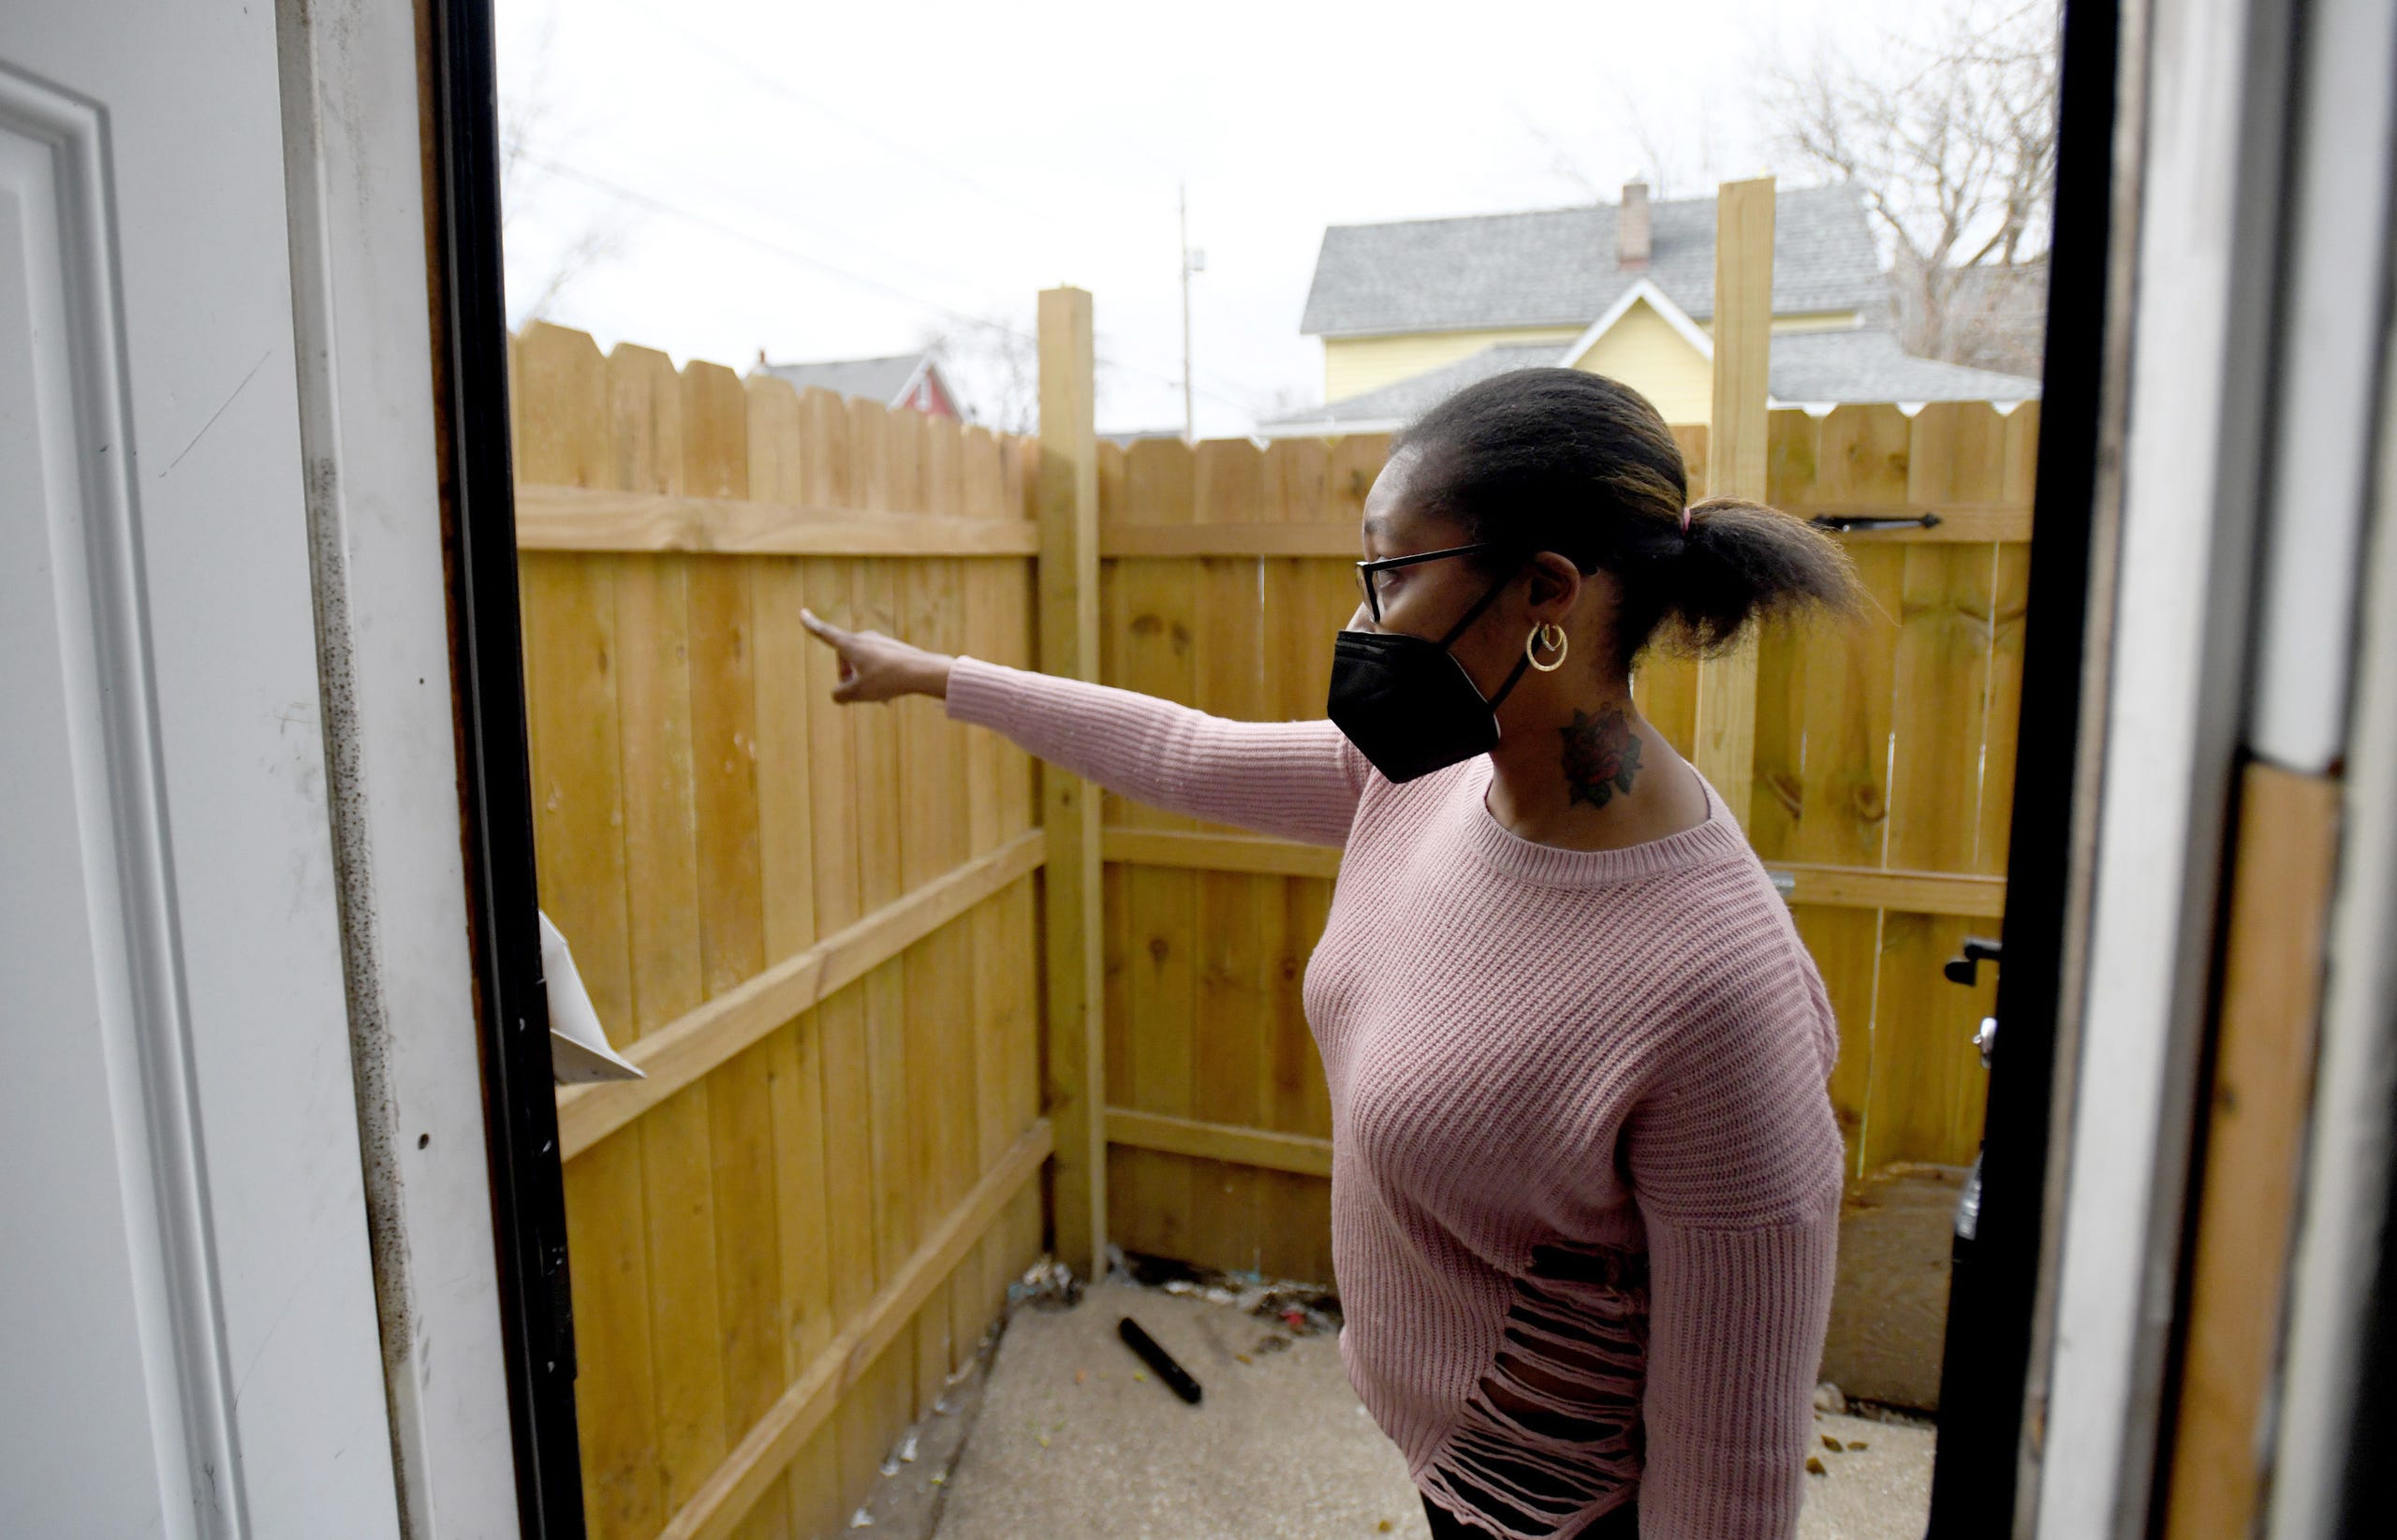 Marquetta Williams recounts the events surrounding the death of her husband, James Williams, 46, who had been shooting celebratory gunfire into the air to ring in 2022 was shot to death by a Canton Police officer firing through the family's enclosed wooden security fence.   Monday, January 3, 2021.